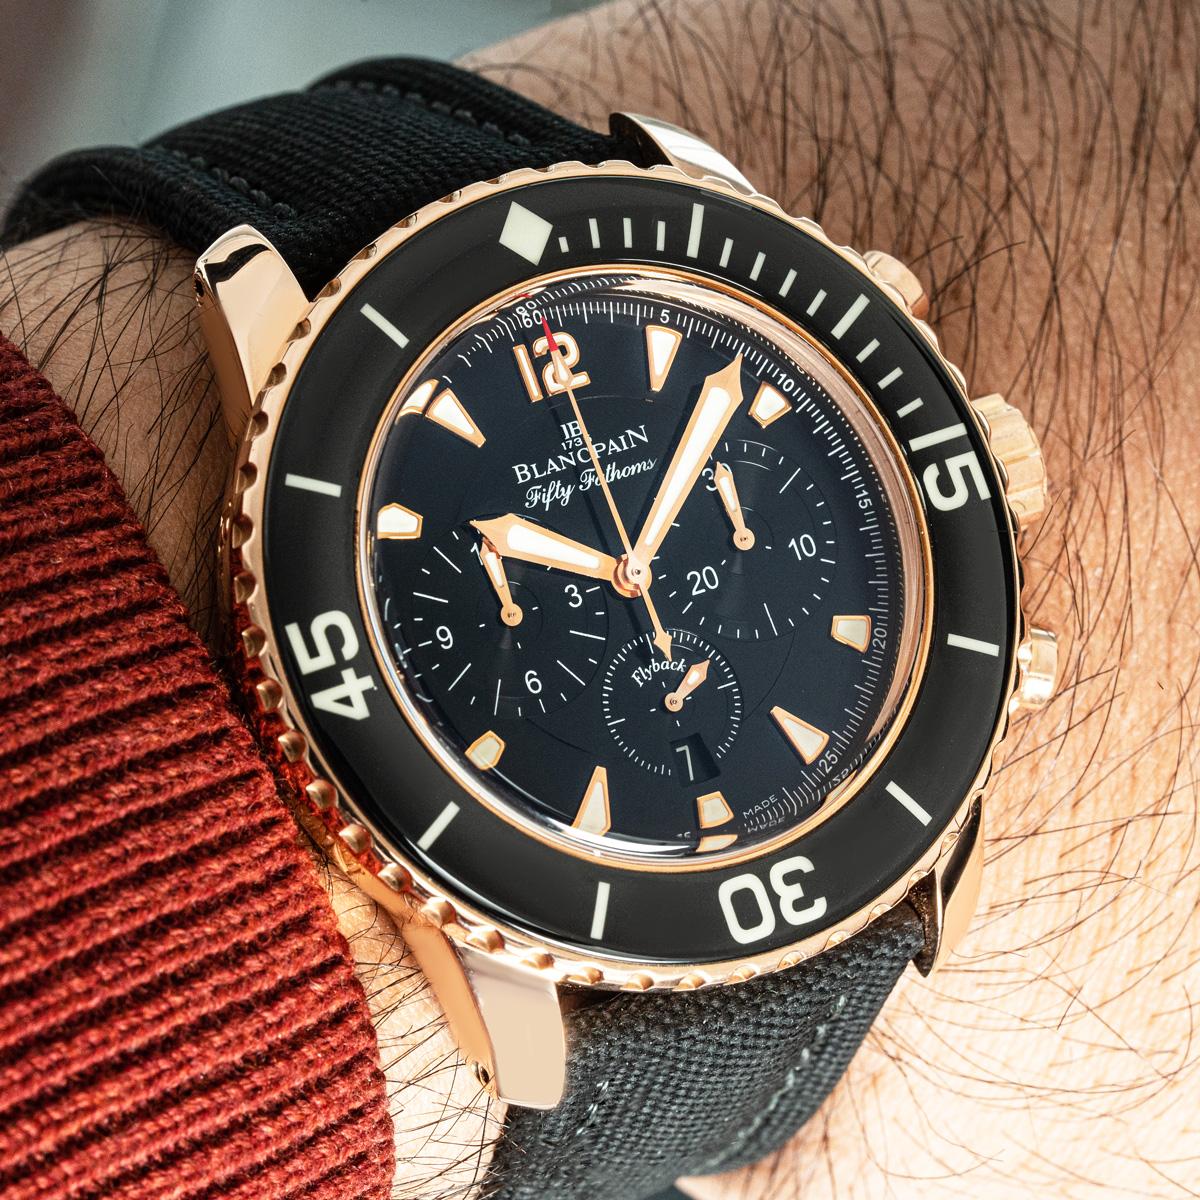 A mens Fifty Fathom's Flyback chronograph crafted in rose gold by Blancpain.

Features a black dial with a date display at 6 0'clock, as well as the 'Flyback' chronograph function which allows instant restarting of the chronograph with one button,